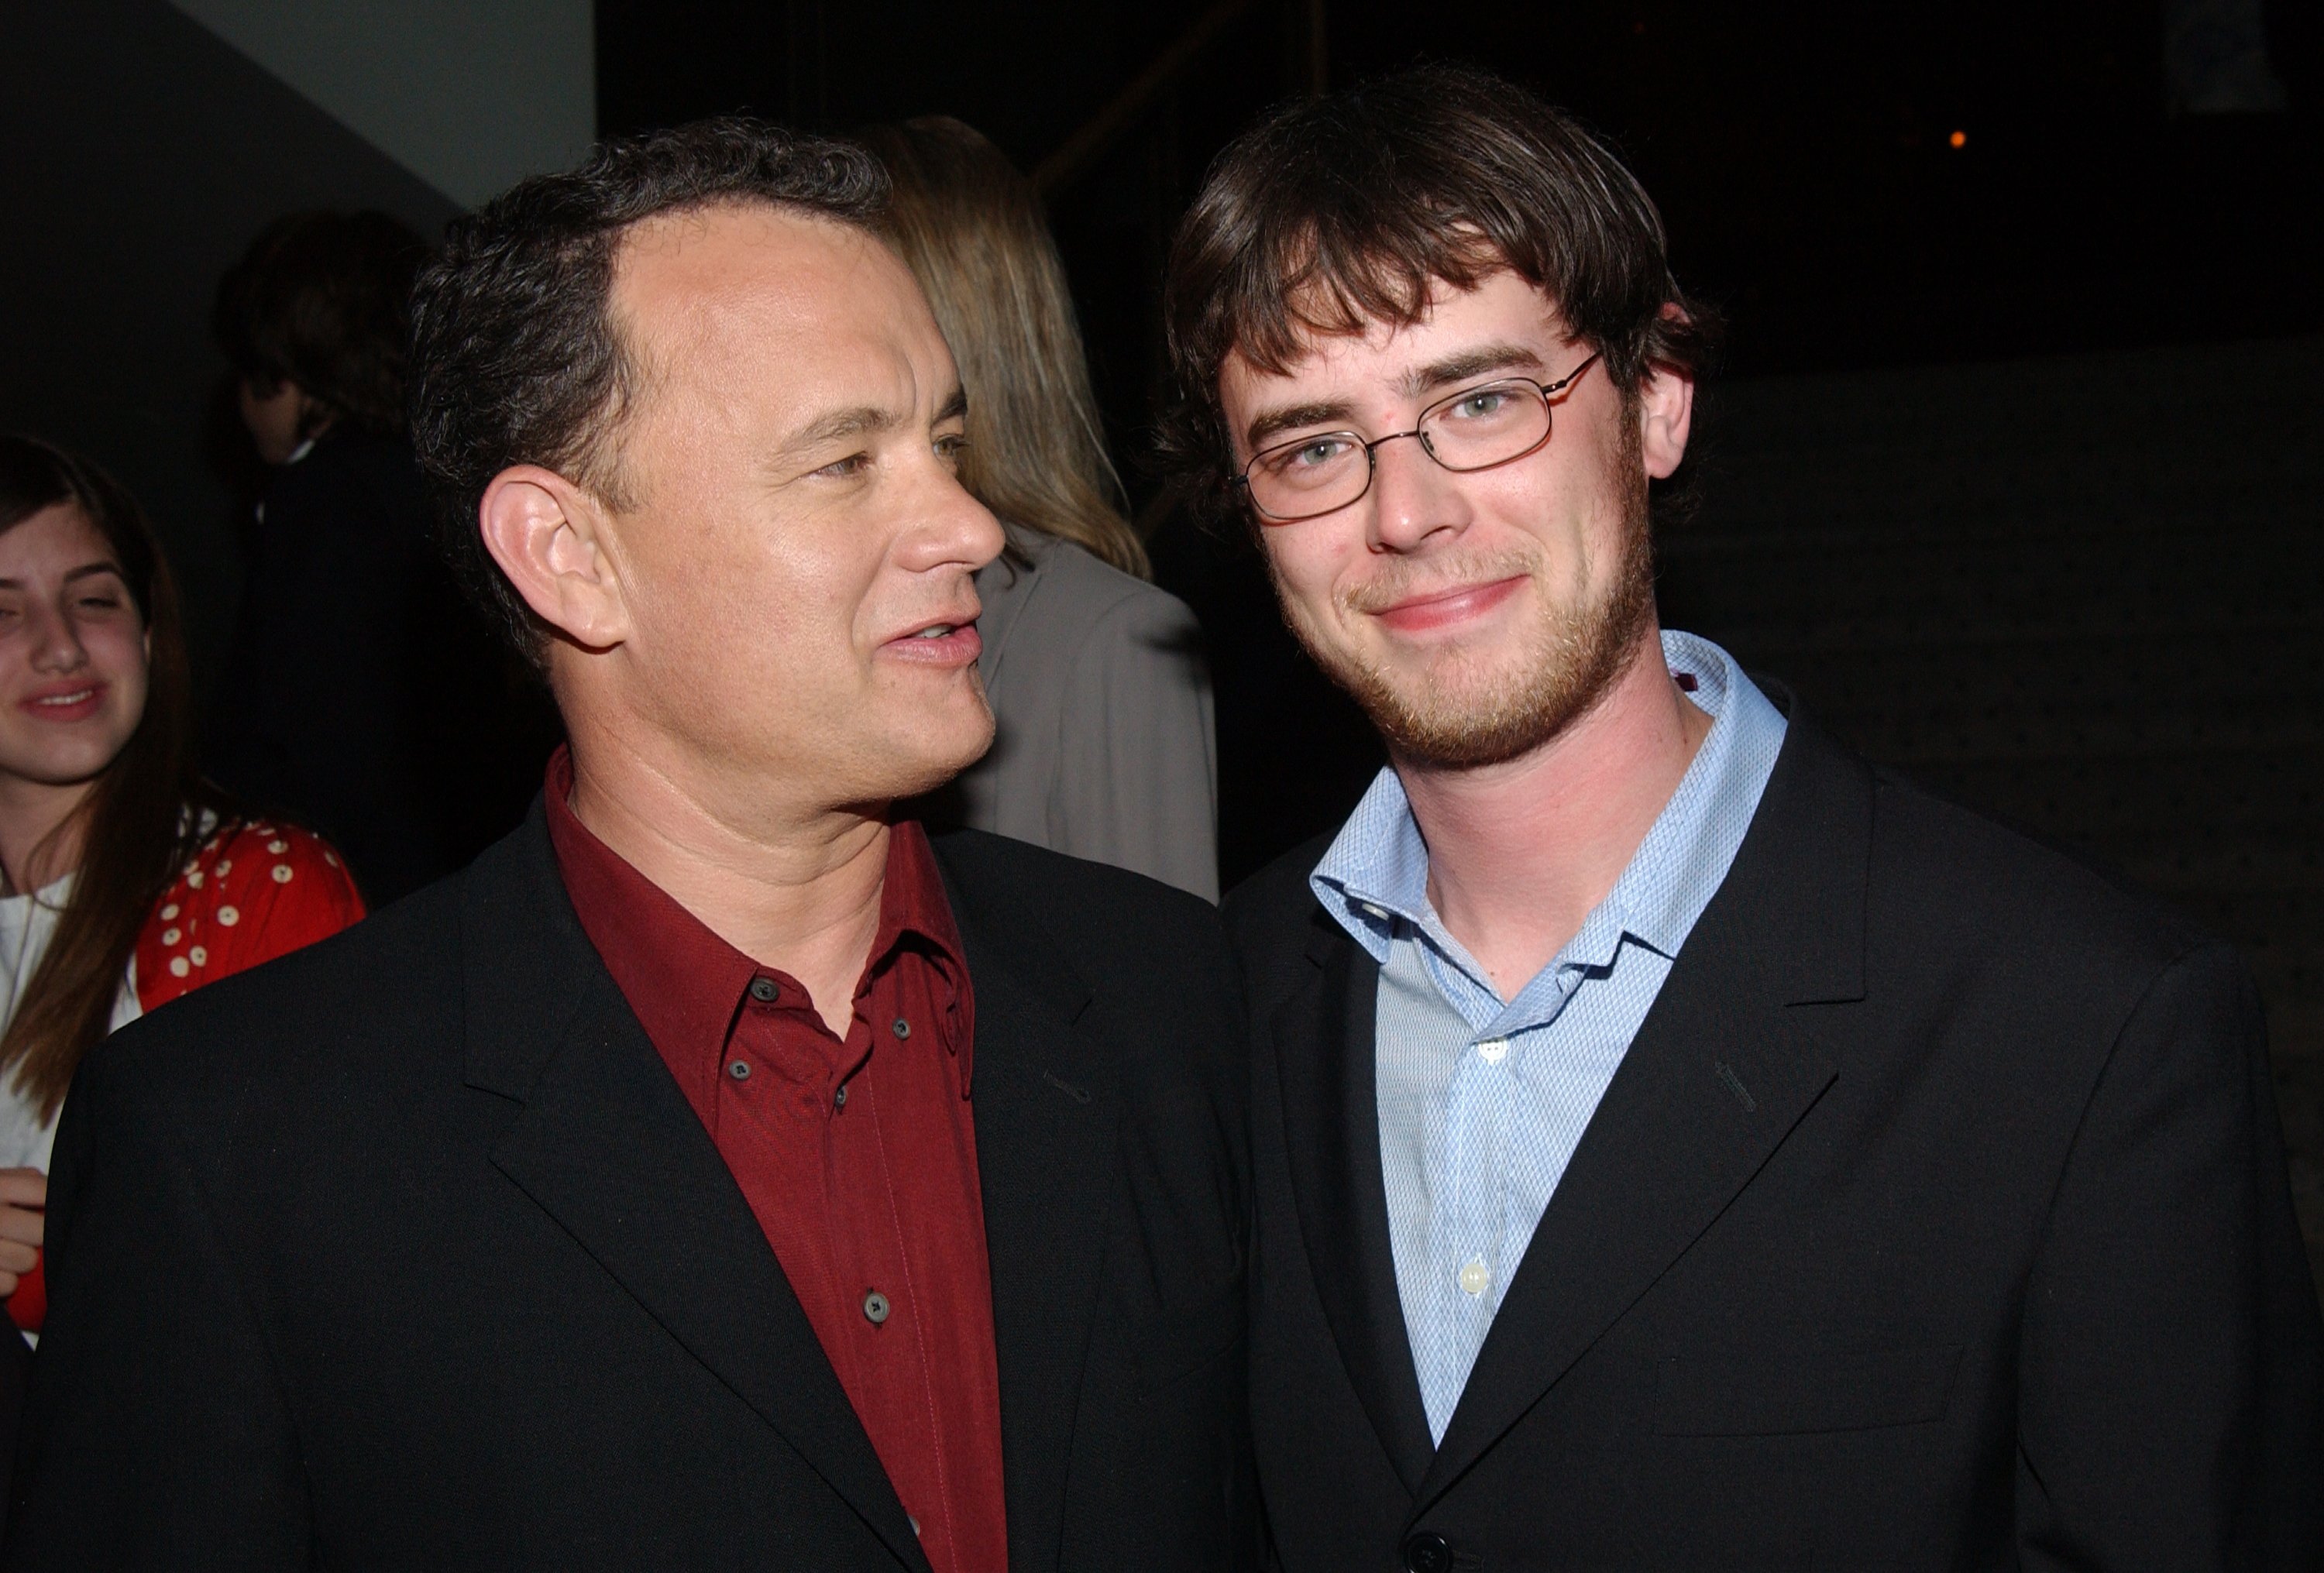 Tom Hanks and son Colin Hanks in Beverly Hills, California | Source: Getty Images